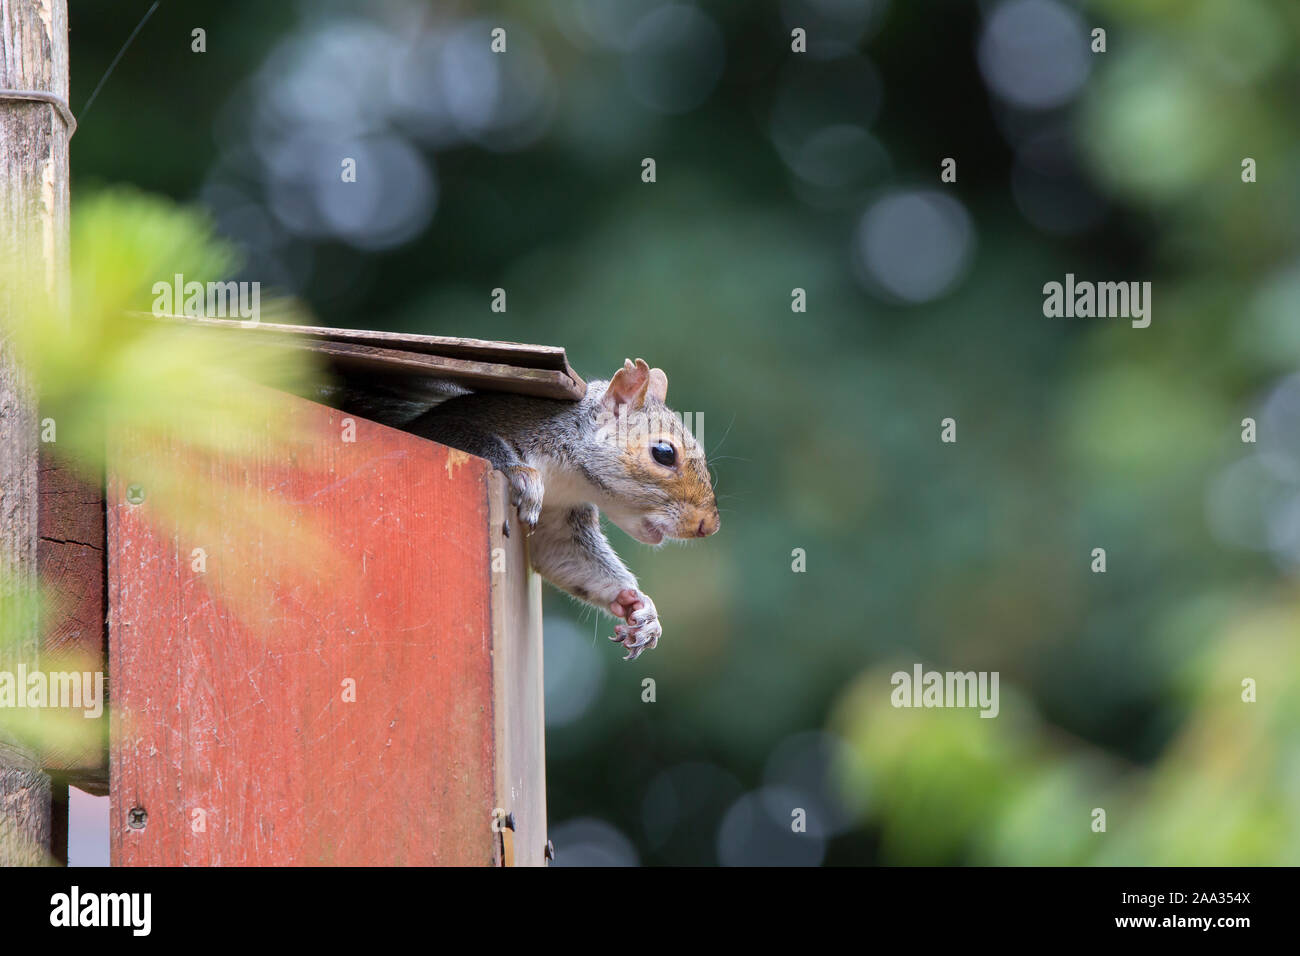 Side view close up of humorous, funny UK grey squirrel (Sciurus carolinensis) isolated outdoors coming out of a garden squirrel feeder box. Stock Photo